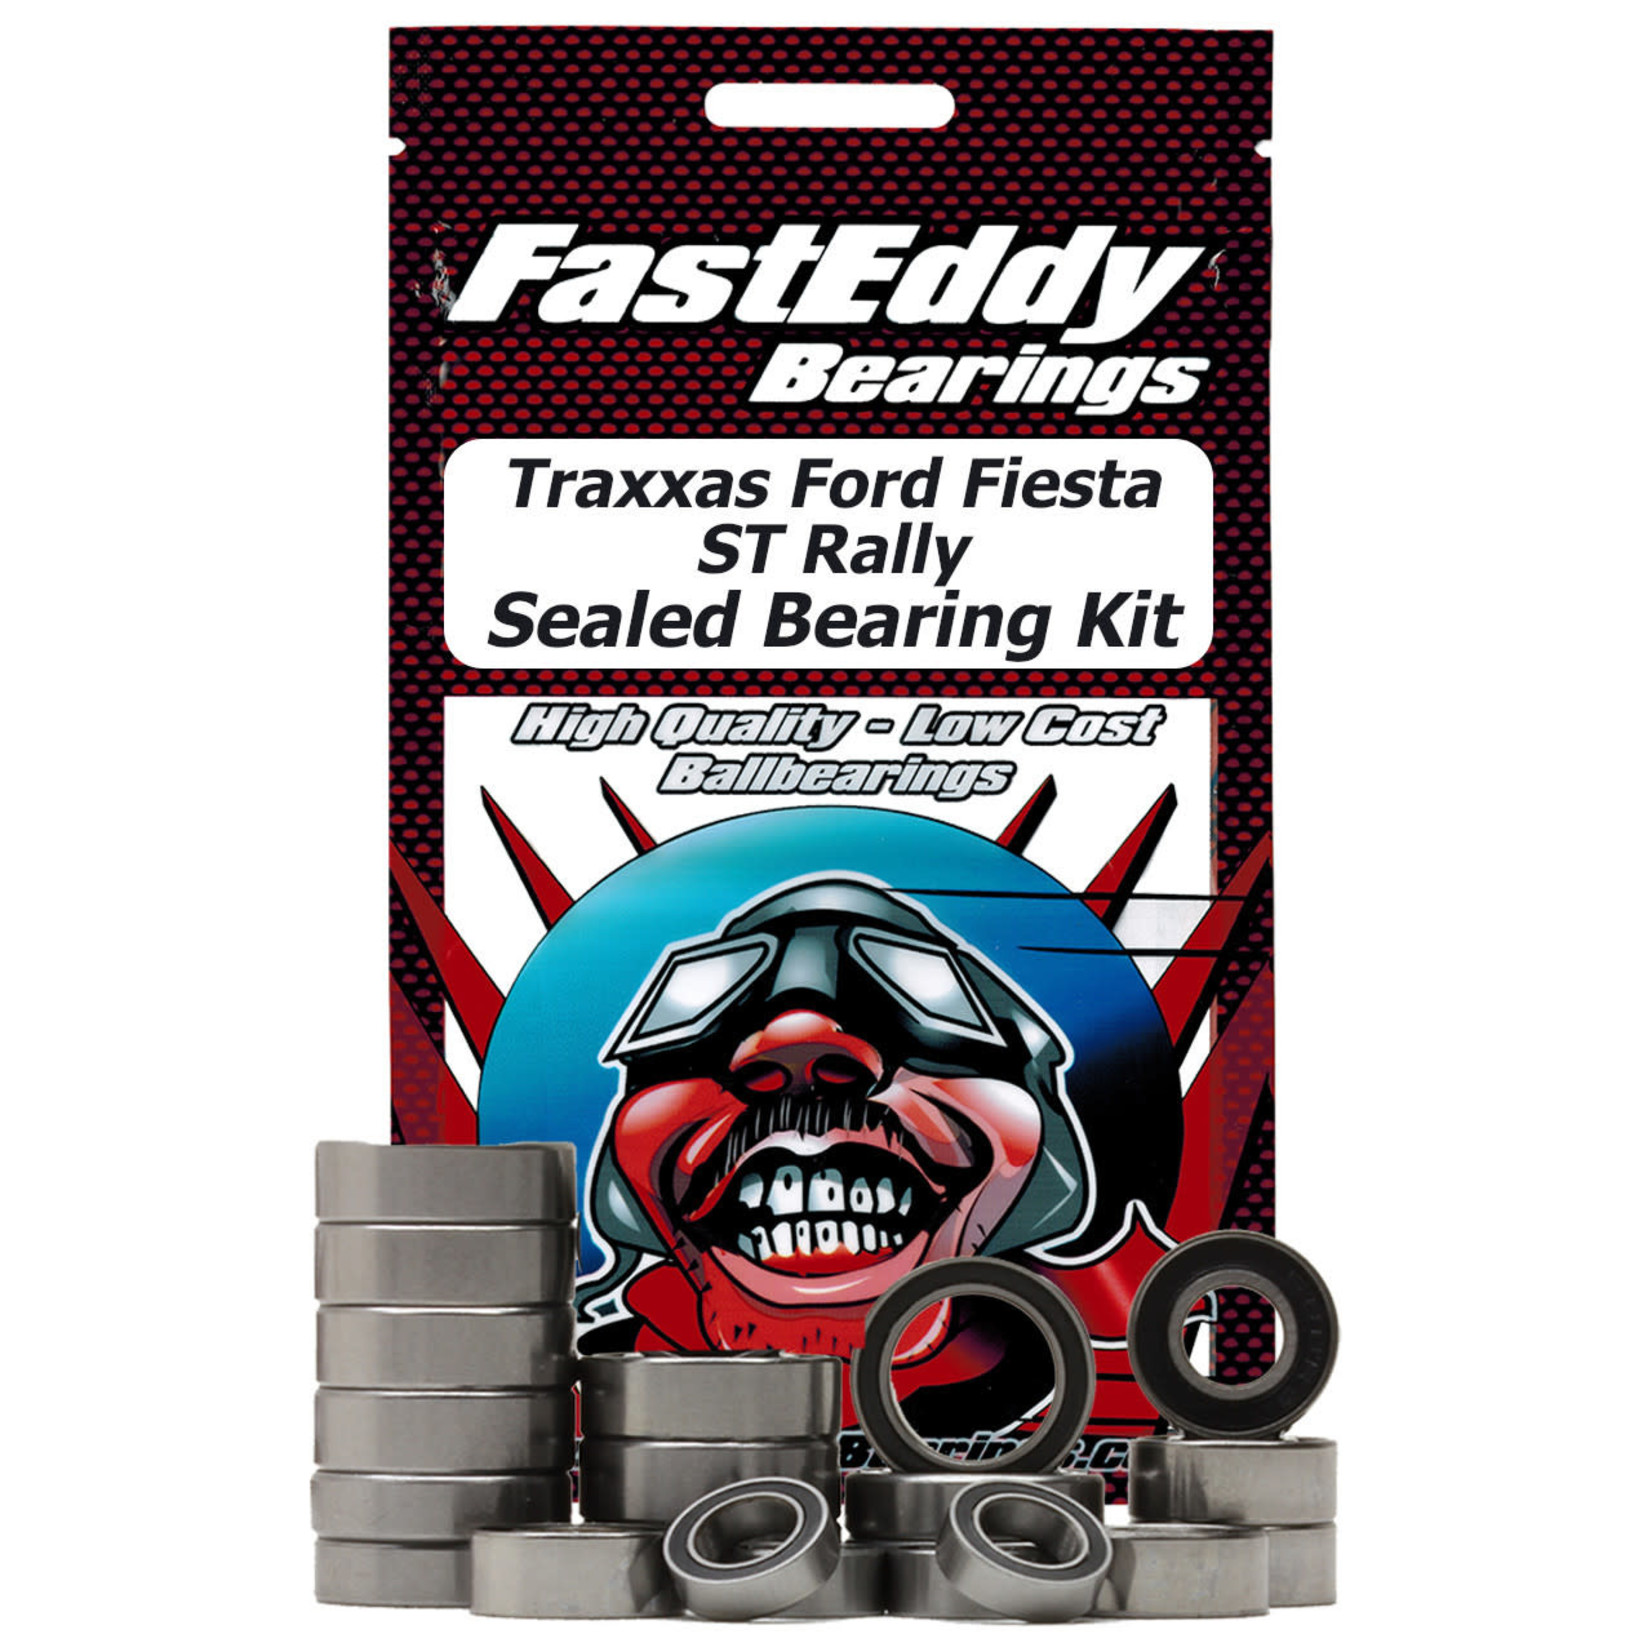 FastEddy FastEddy Traxxas Ford Fiesta ST Rally Sealed Bearing Kit #TFE7386